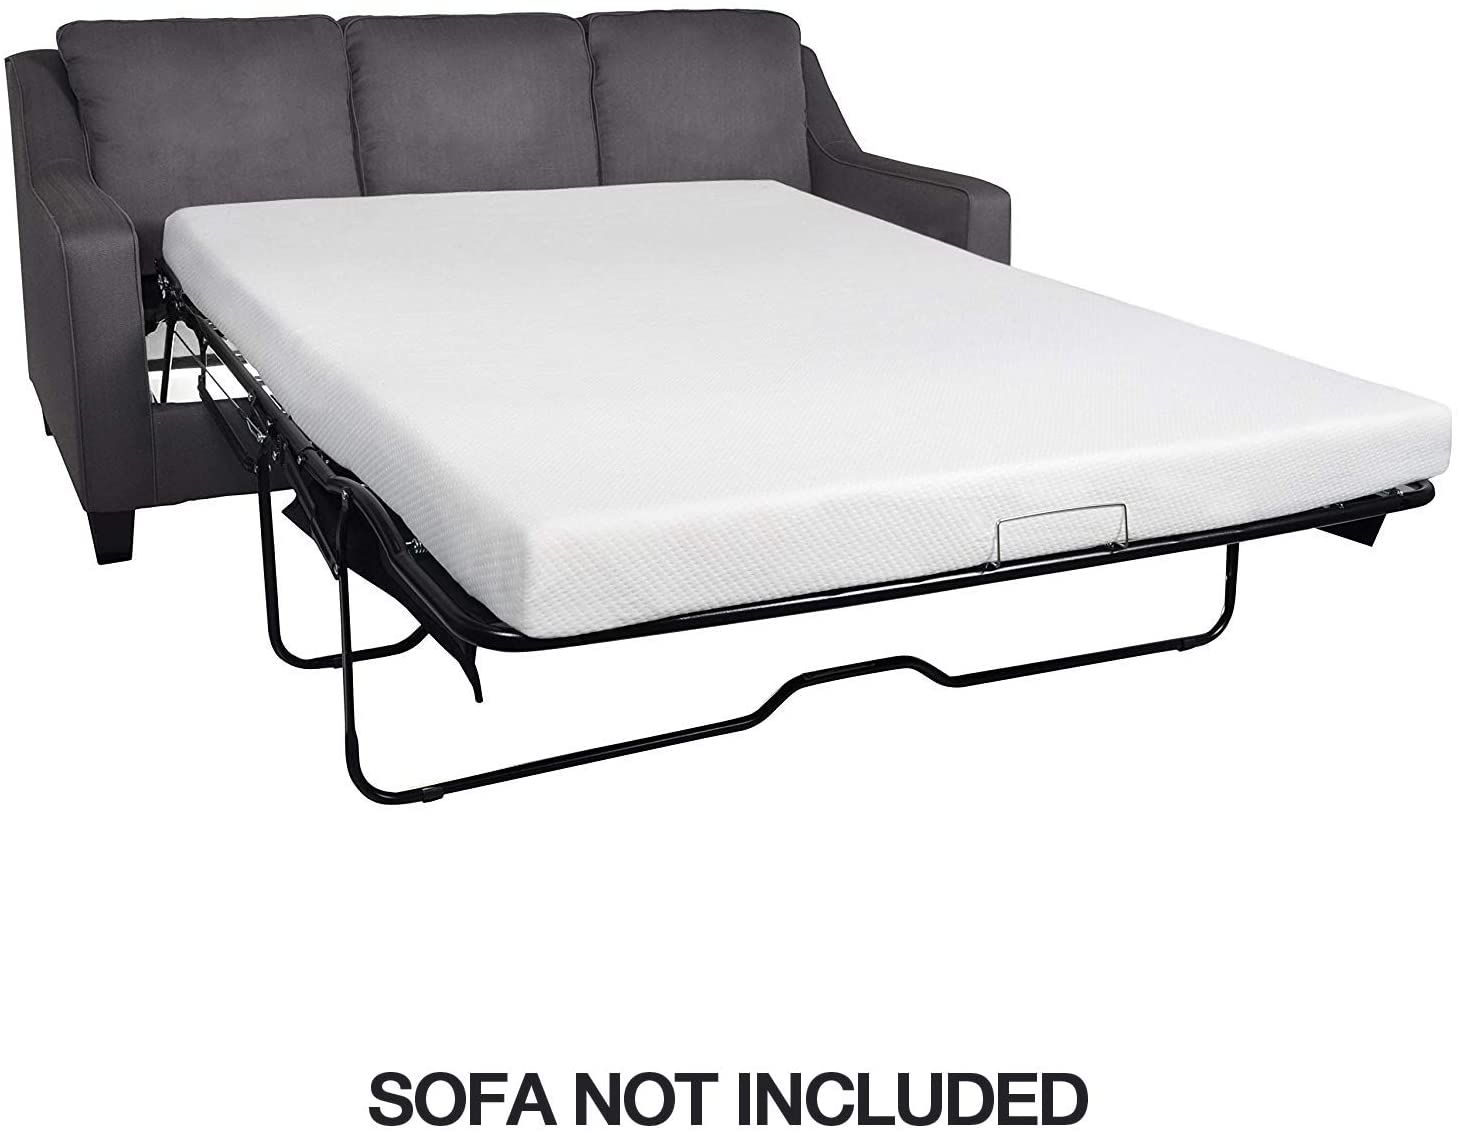 replacement mattress for stanton sofa bed